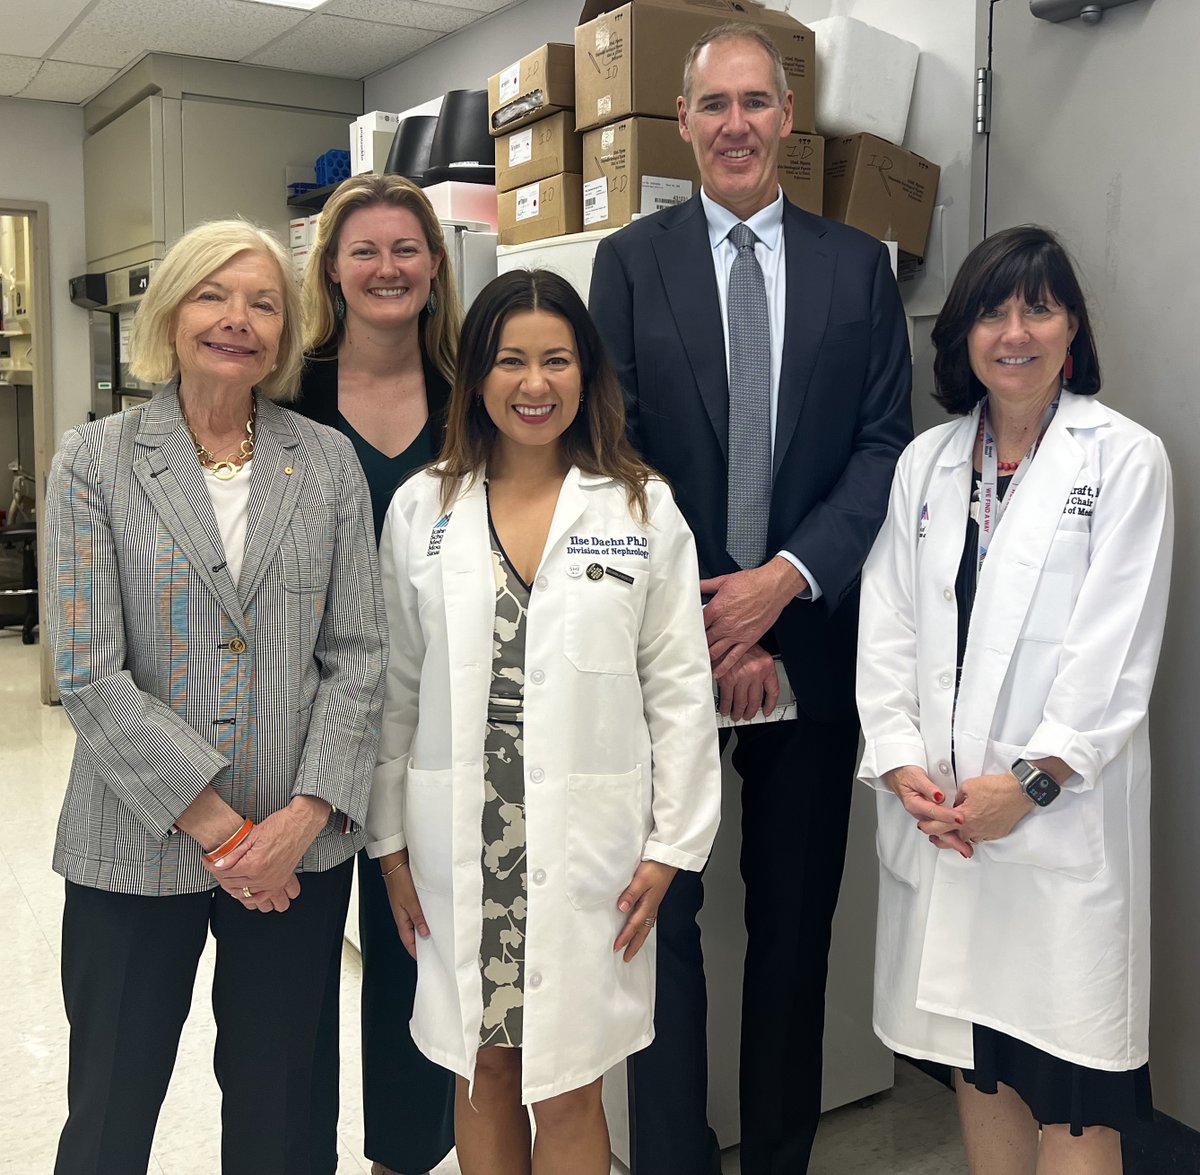 Such a thrill to host🇦🇺Consul-General in NY Heather Ridout at @IcahnMountSinai last week! So much amazing research happening with powerful connections between 🇺🇸🇦🇺! Big thanks to: @ilse_daehn @SinaiHeartBlood @MountSinaiHeart @DOMSinaiNYC @ISMMSKidney